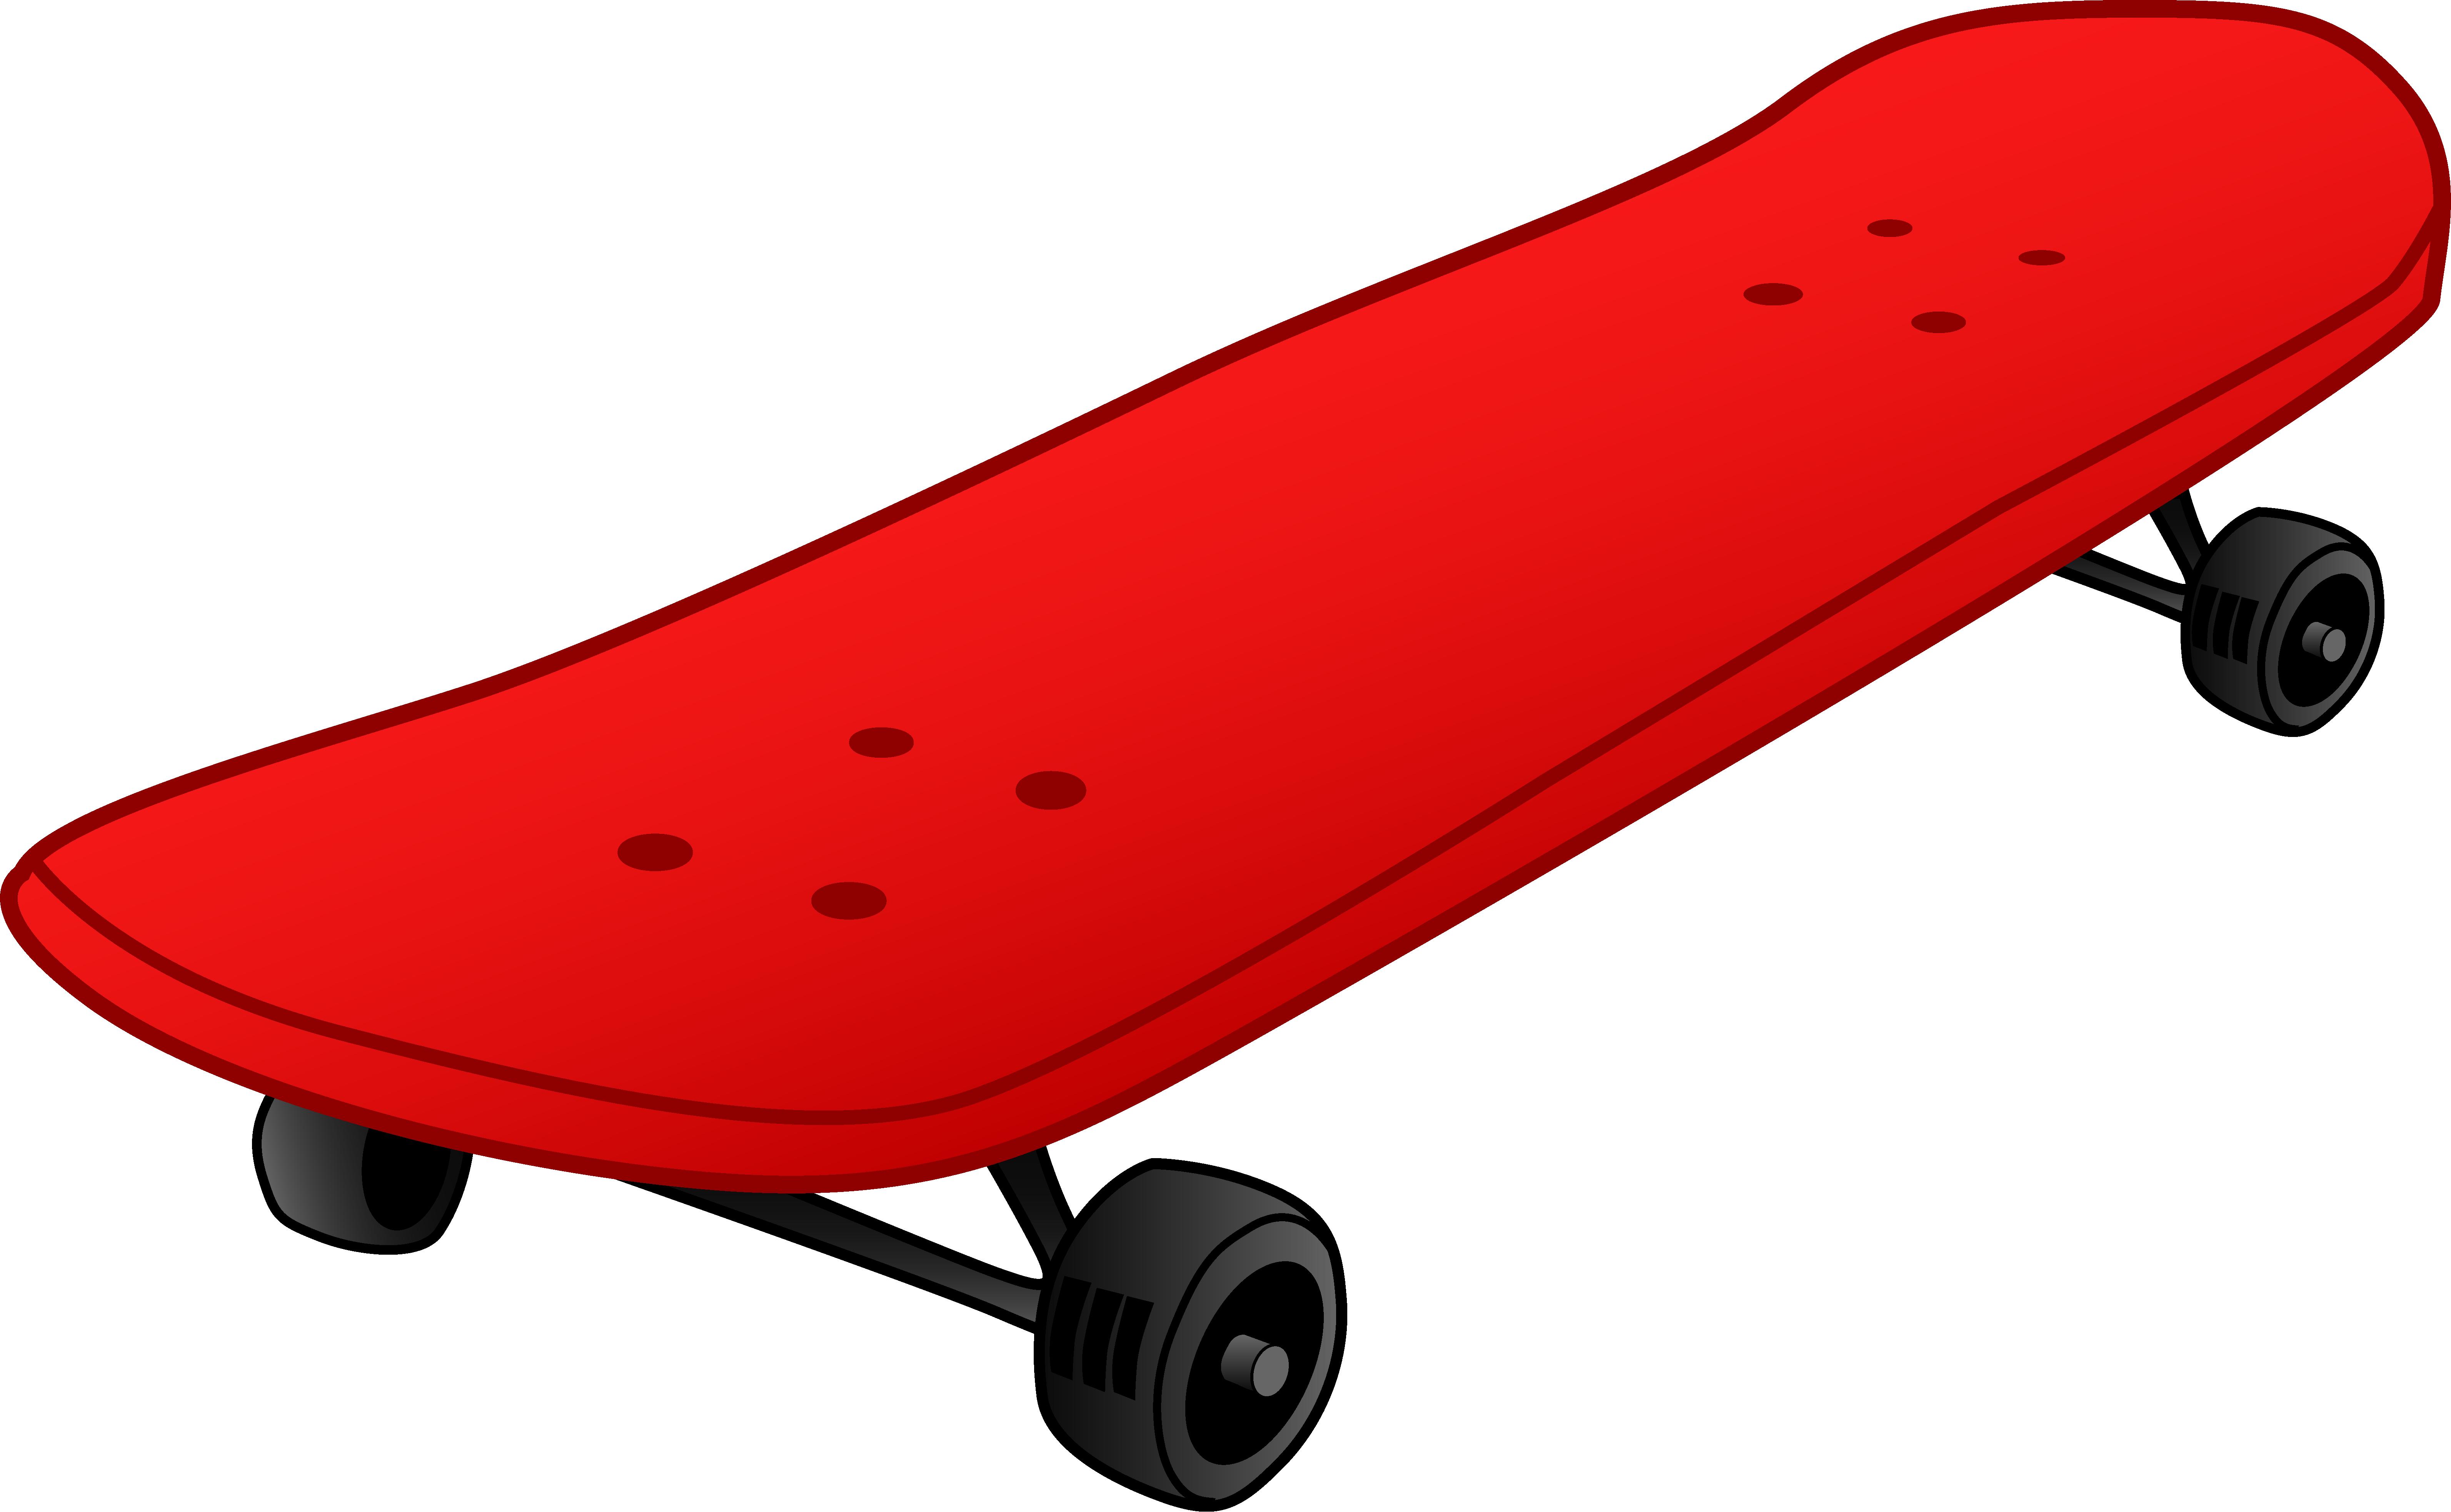 skateboarding pictures hd